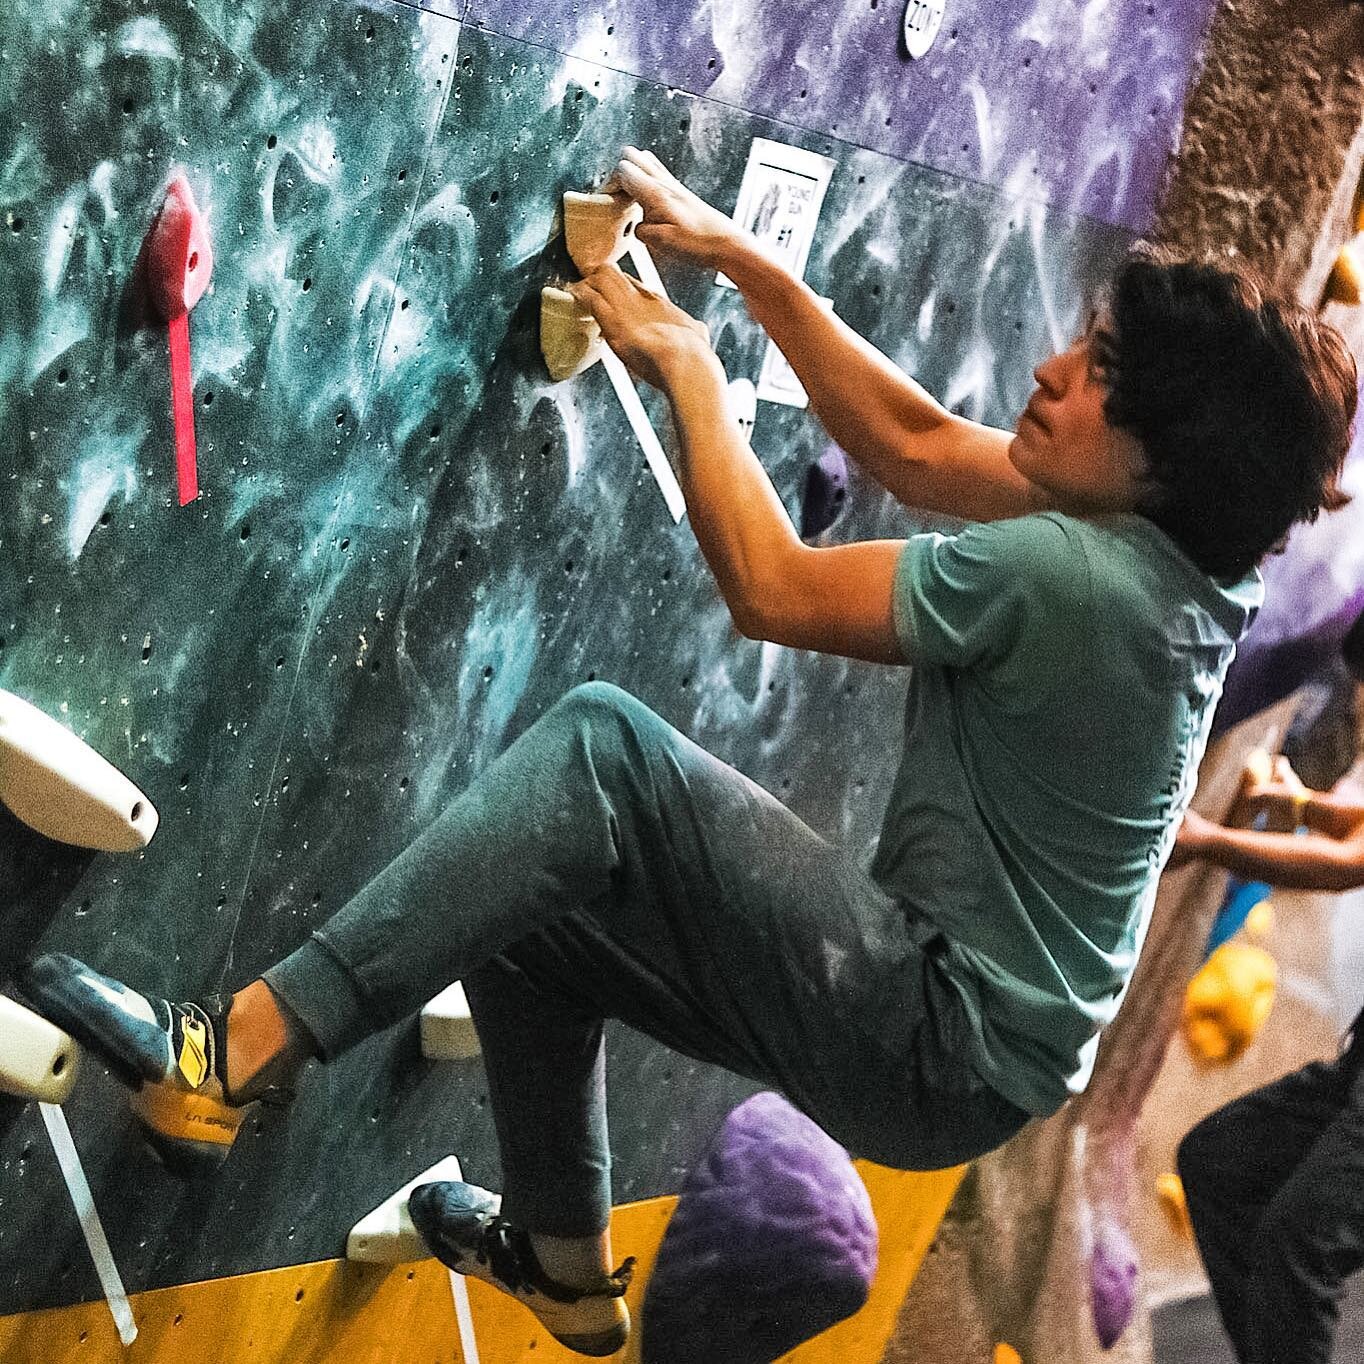 SESSION 3 is SOLD OUT! A few Open and Young Guns Spots remain, as well as spots in Session 2 Citizens. Link in bio to register! #bouldering #boulderingcompetition #darkhorseboulderingseries #foryourmountain 📷: @artcavebychristina